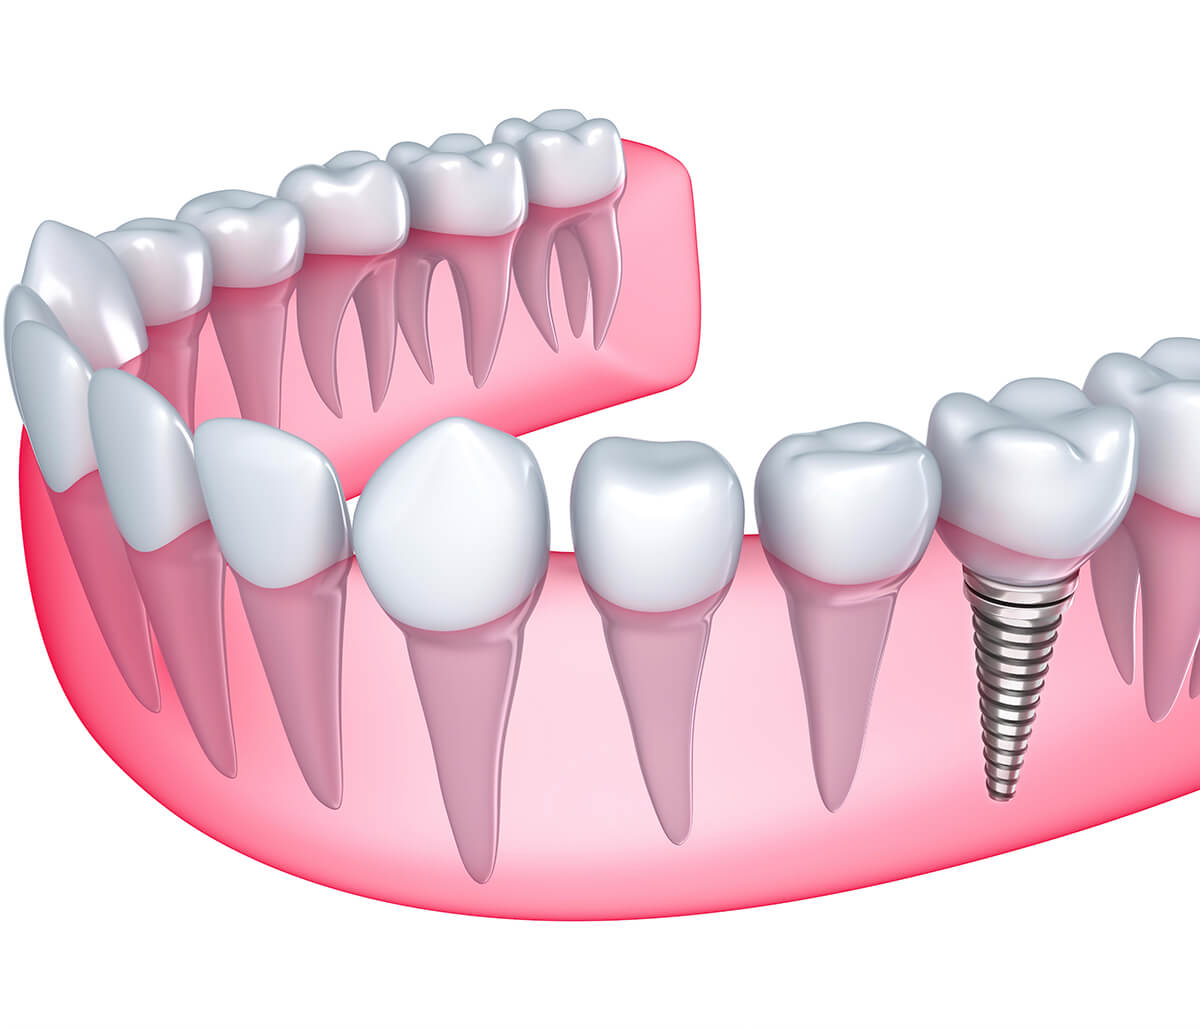 Replace Your Missing Teeth with Dental Implants Treatment in Yadkinville Area